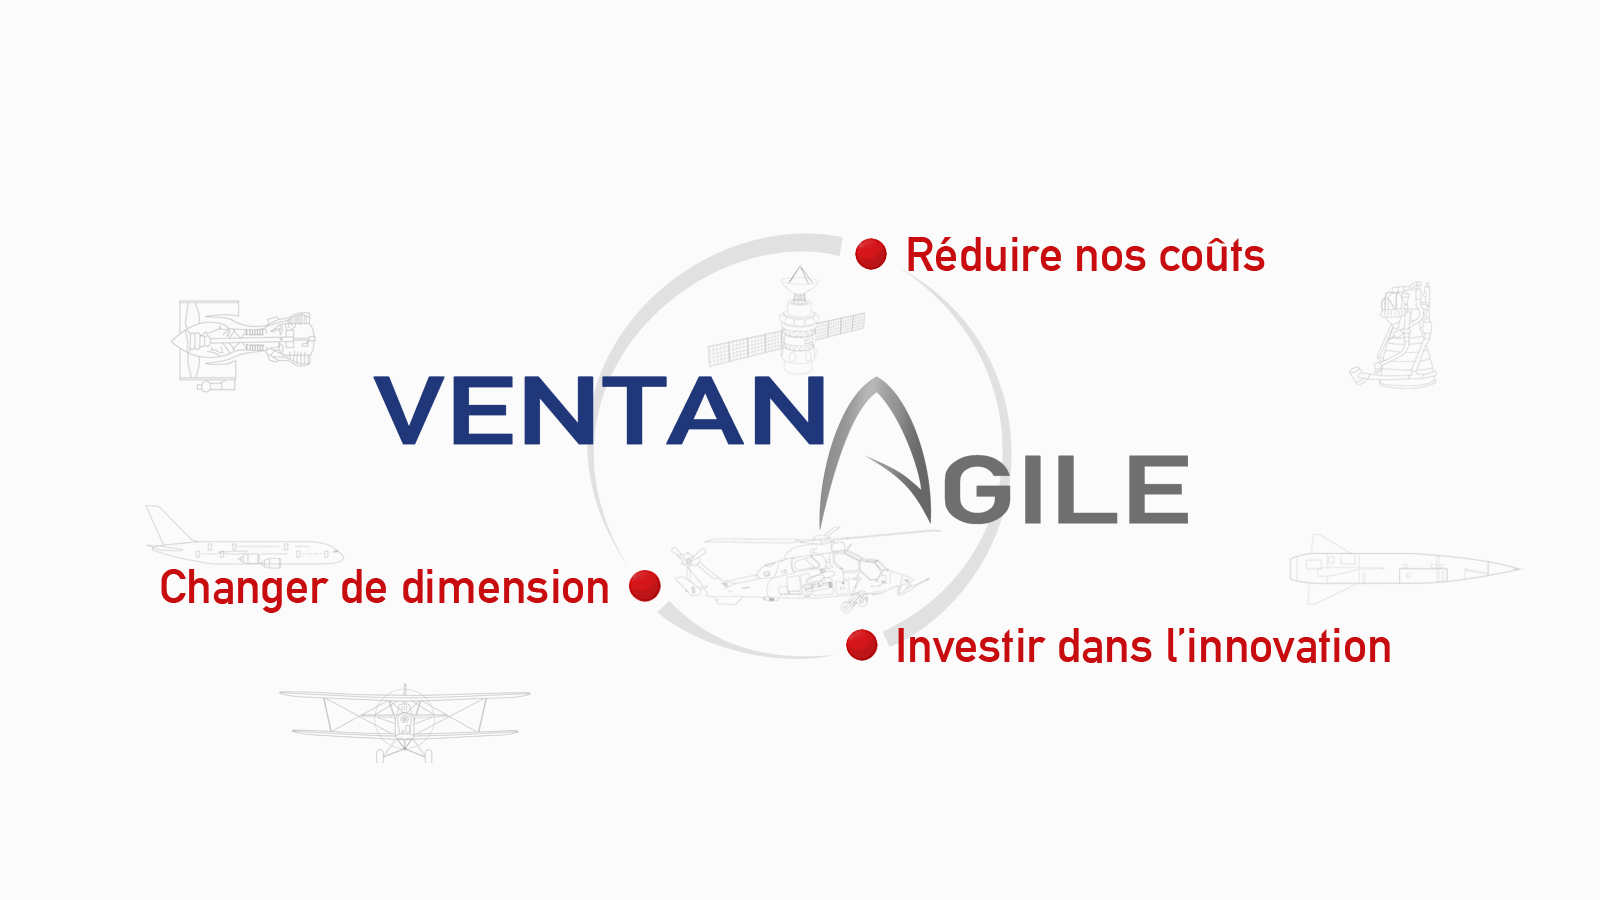 VENTANA is launching its new company project : AGILE2018